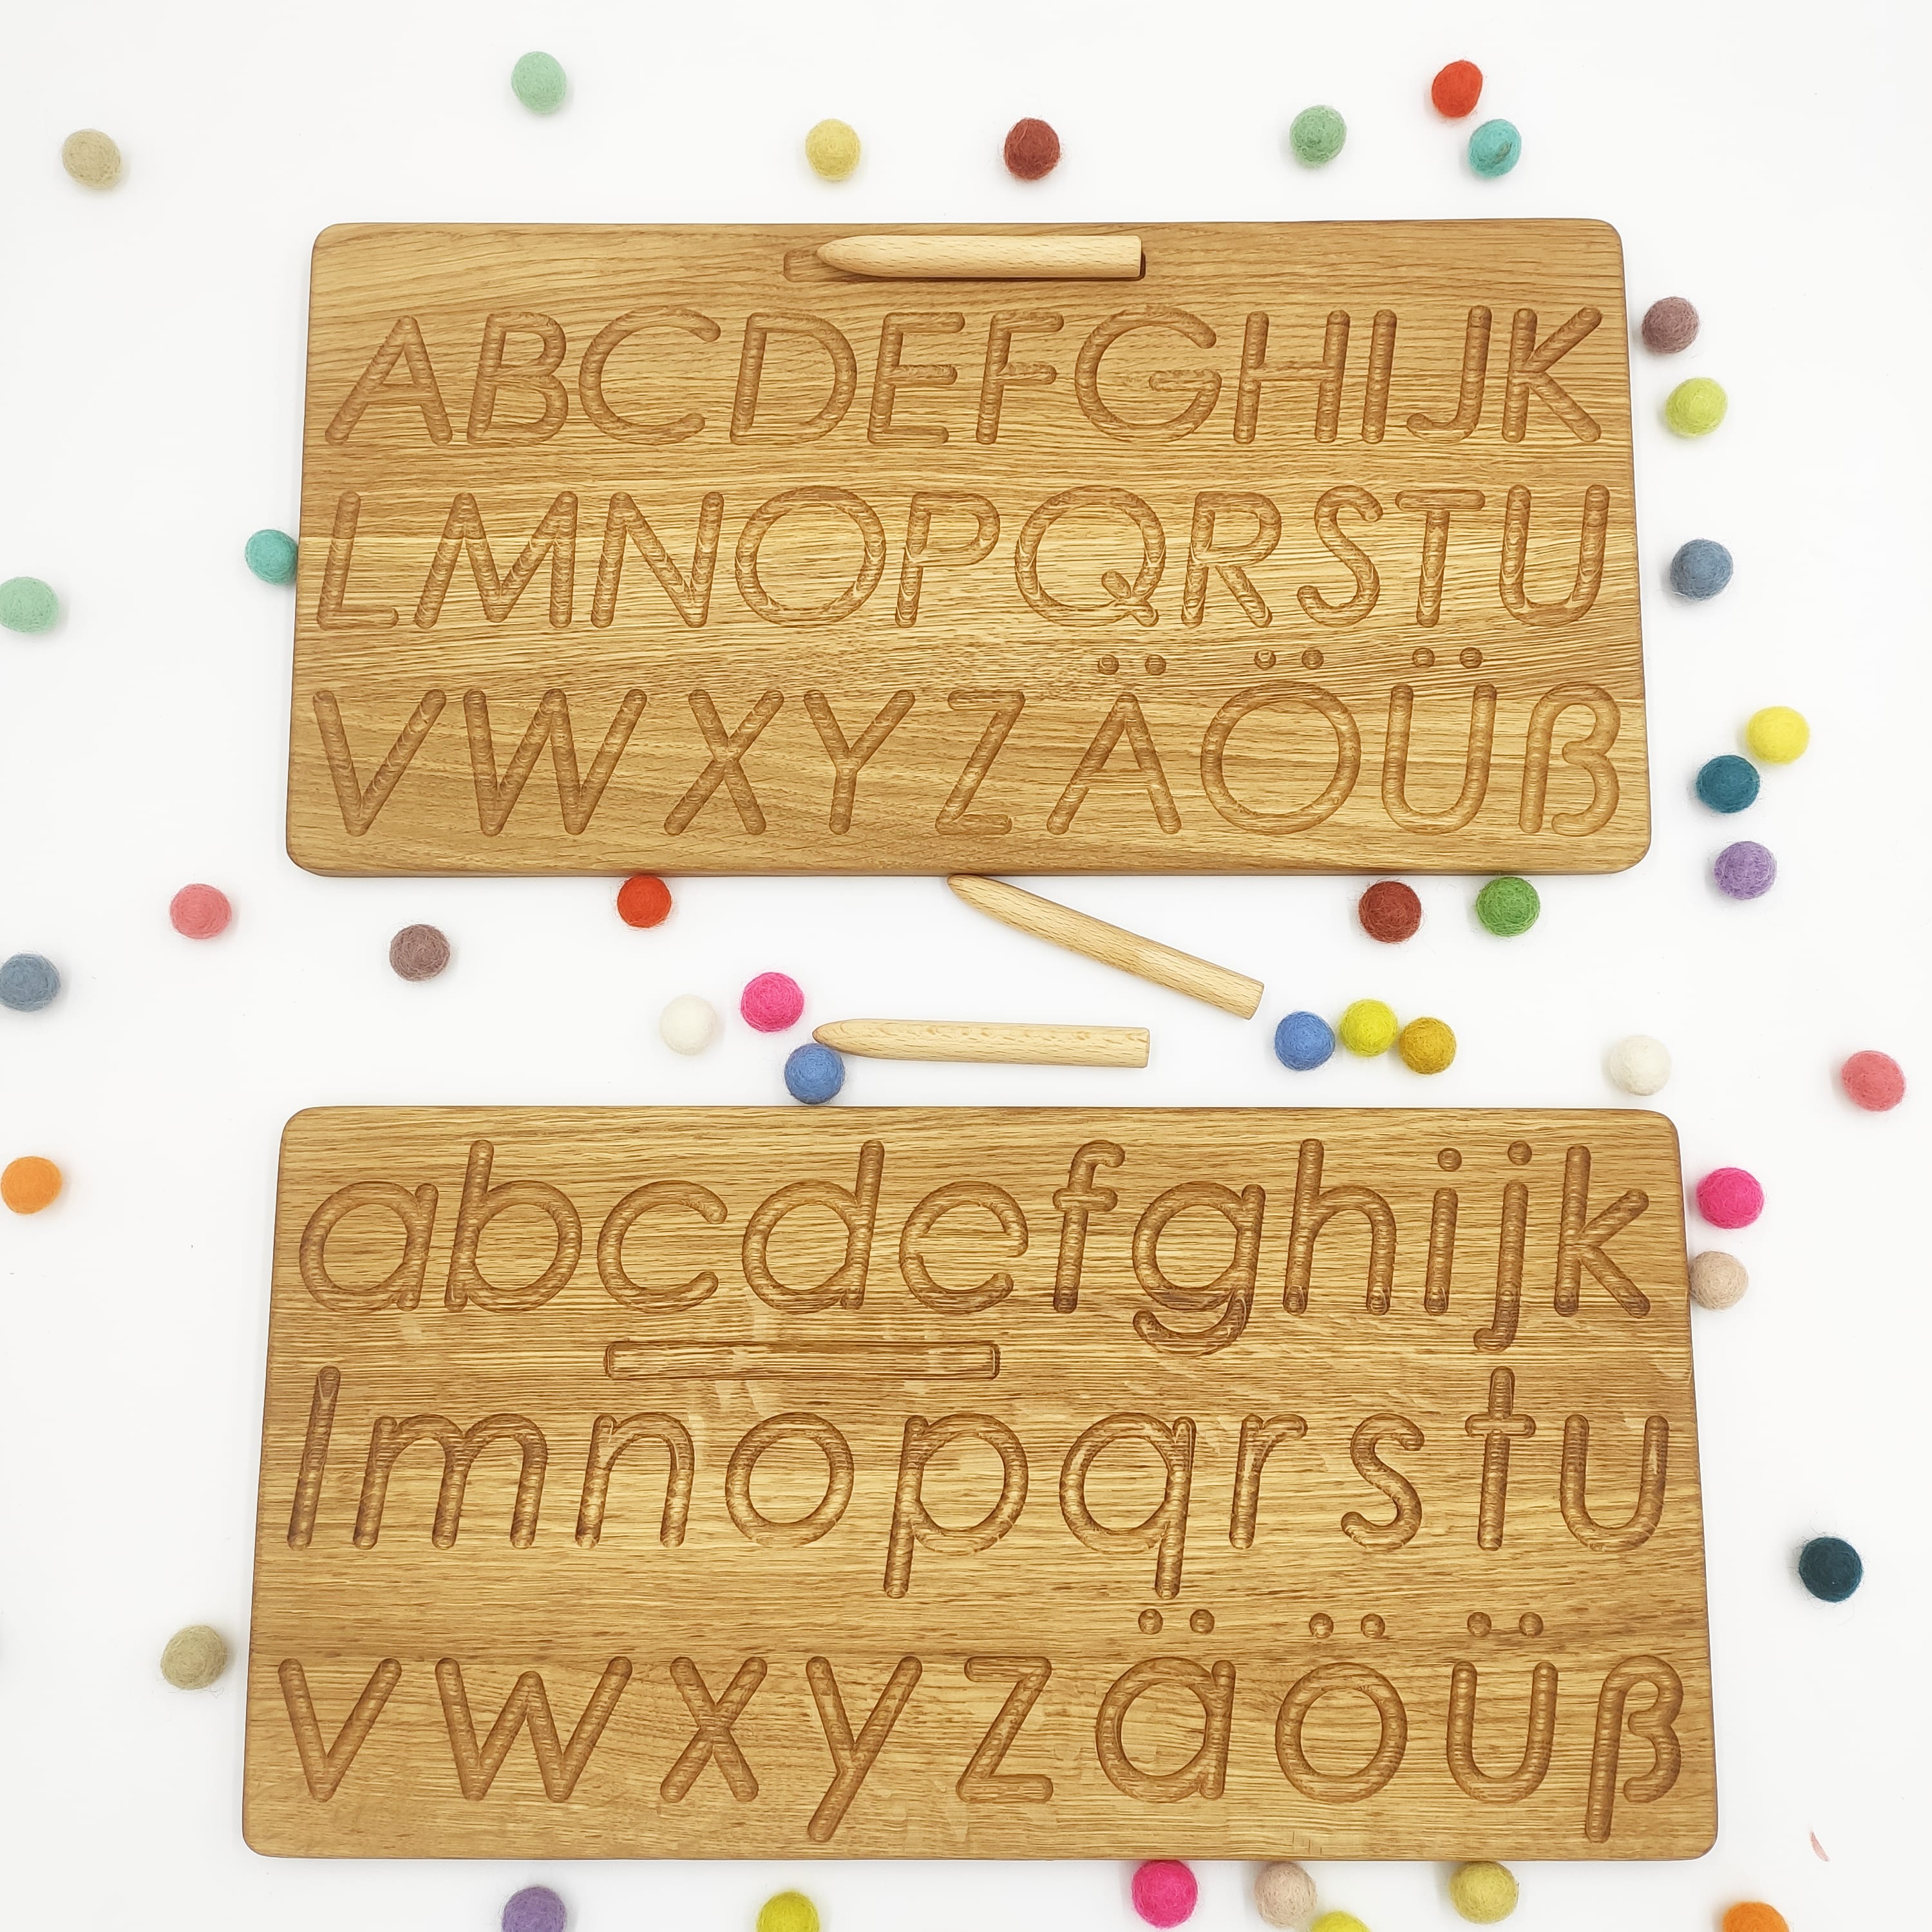 German alphabet reversible tracing board with printed uppercase and lowercase letters